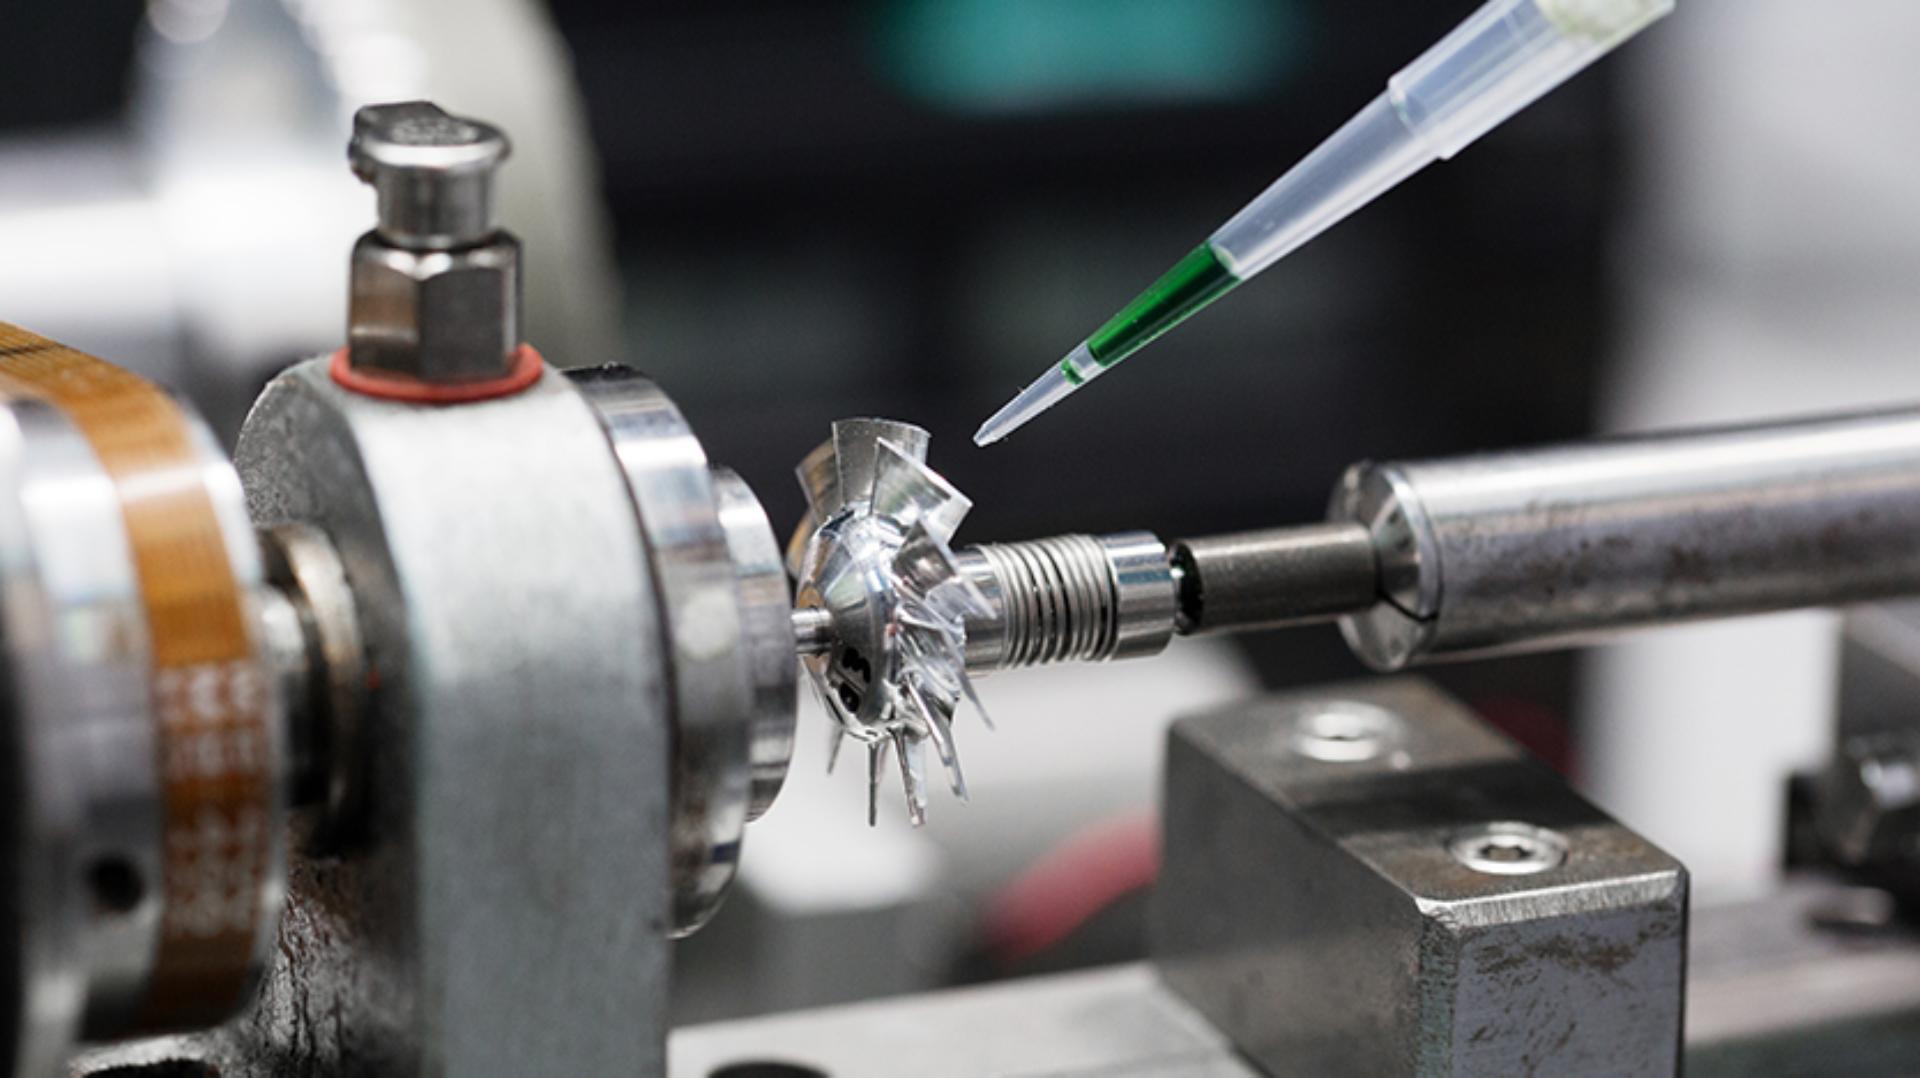 The high-speed impeller of a Dyson digital motor being machined